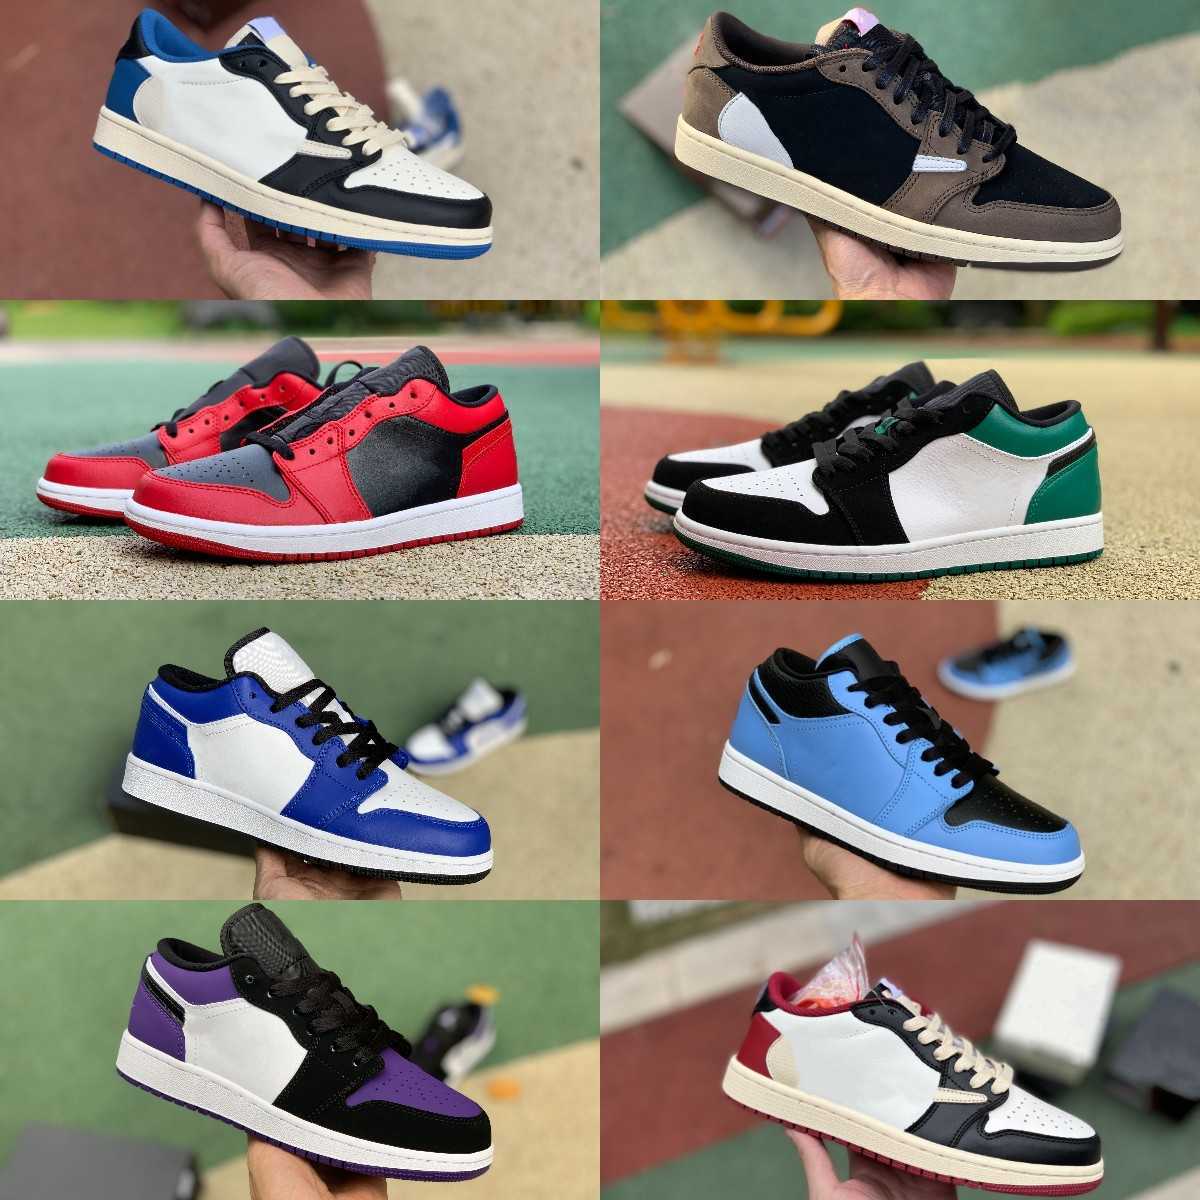 

2023 OG 2022 Fragment TS Jumpman X 1 1S Low Basketball Shoes White Brown Red Gold Banned UNC Court Purple Black Toe Shadow Panda Emerald Crimson, Silver toe